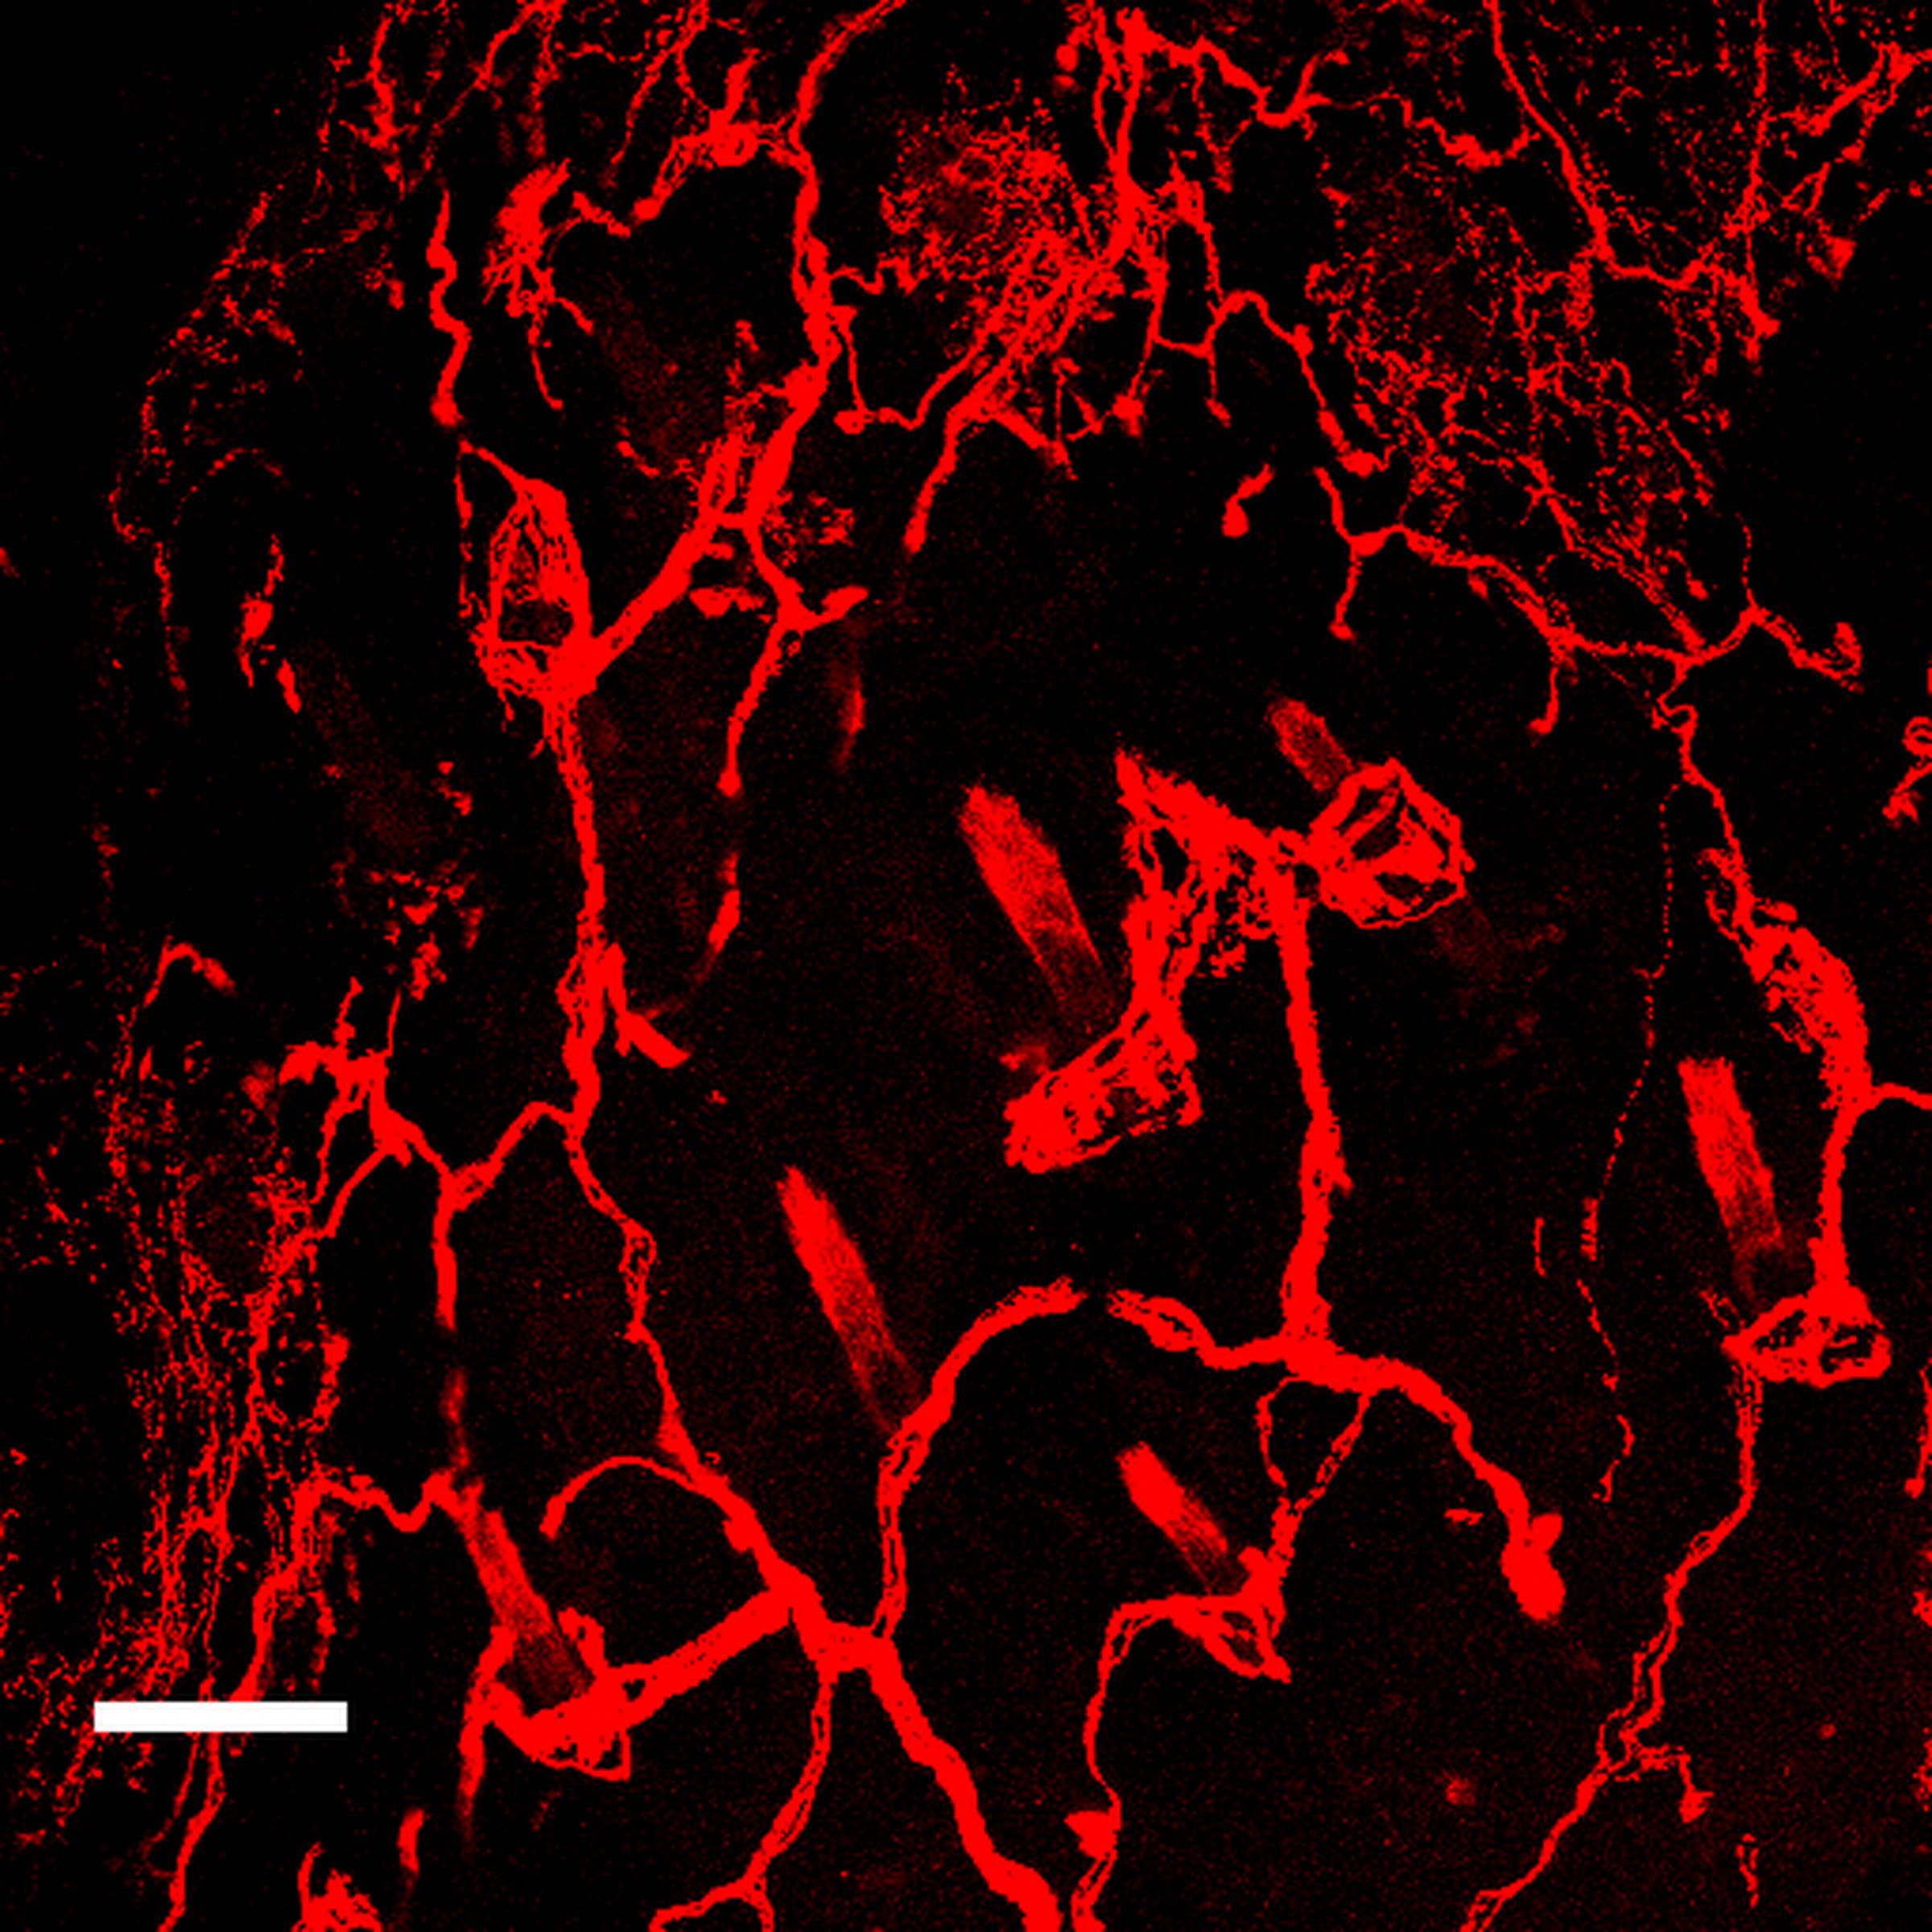 Scientists capture most detailed images of nerve endings ever 